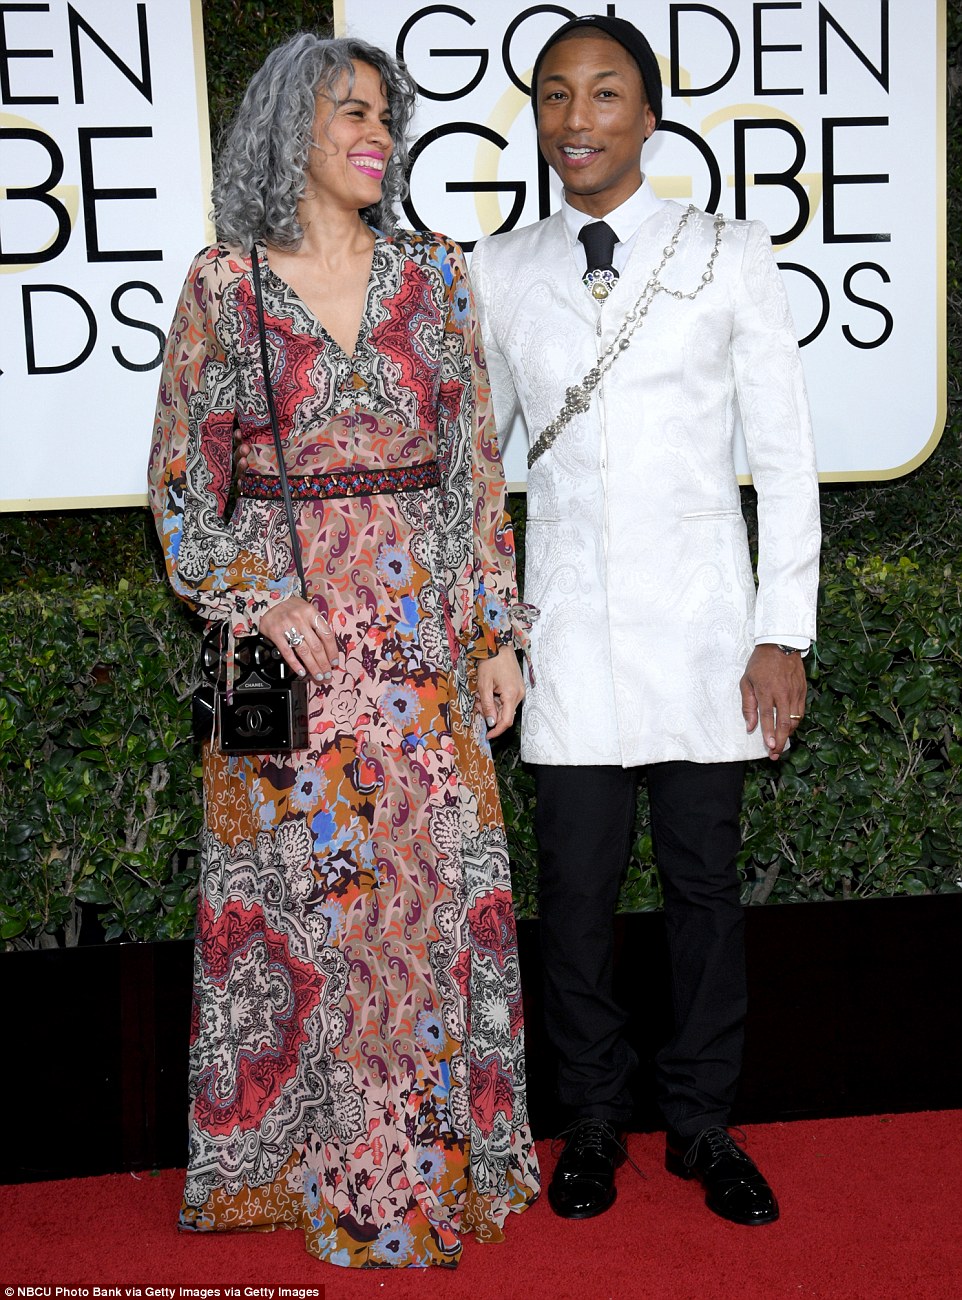 3bf7bd9300000578-4100390-quite_a_pair_pharrell_williams_and_his_wife_helen_lasichanh_came-m-116_1483927575392